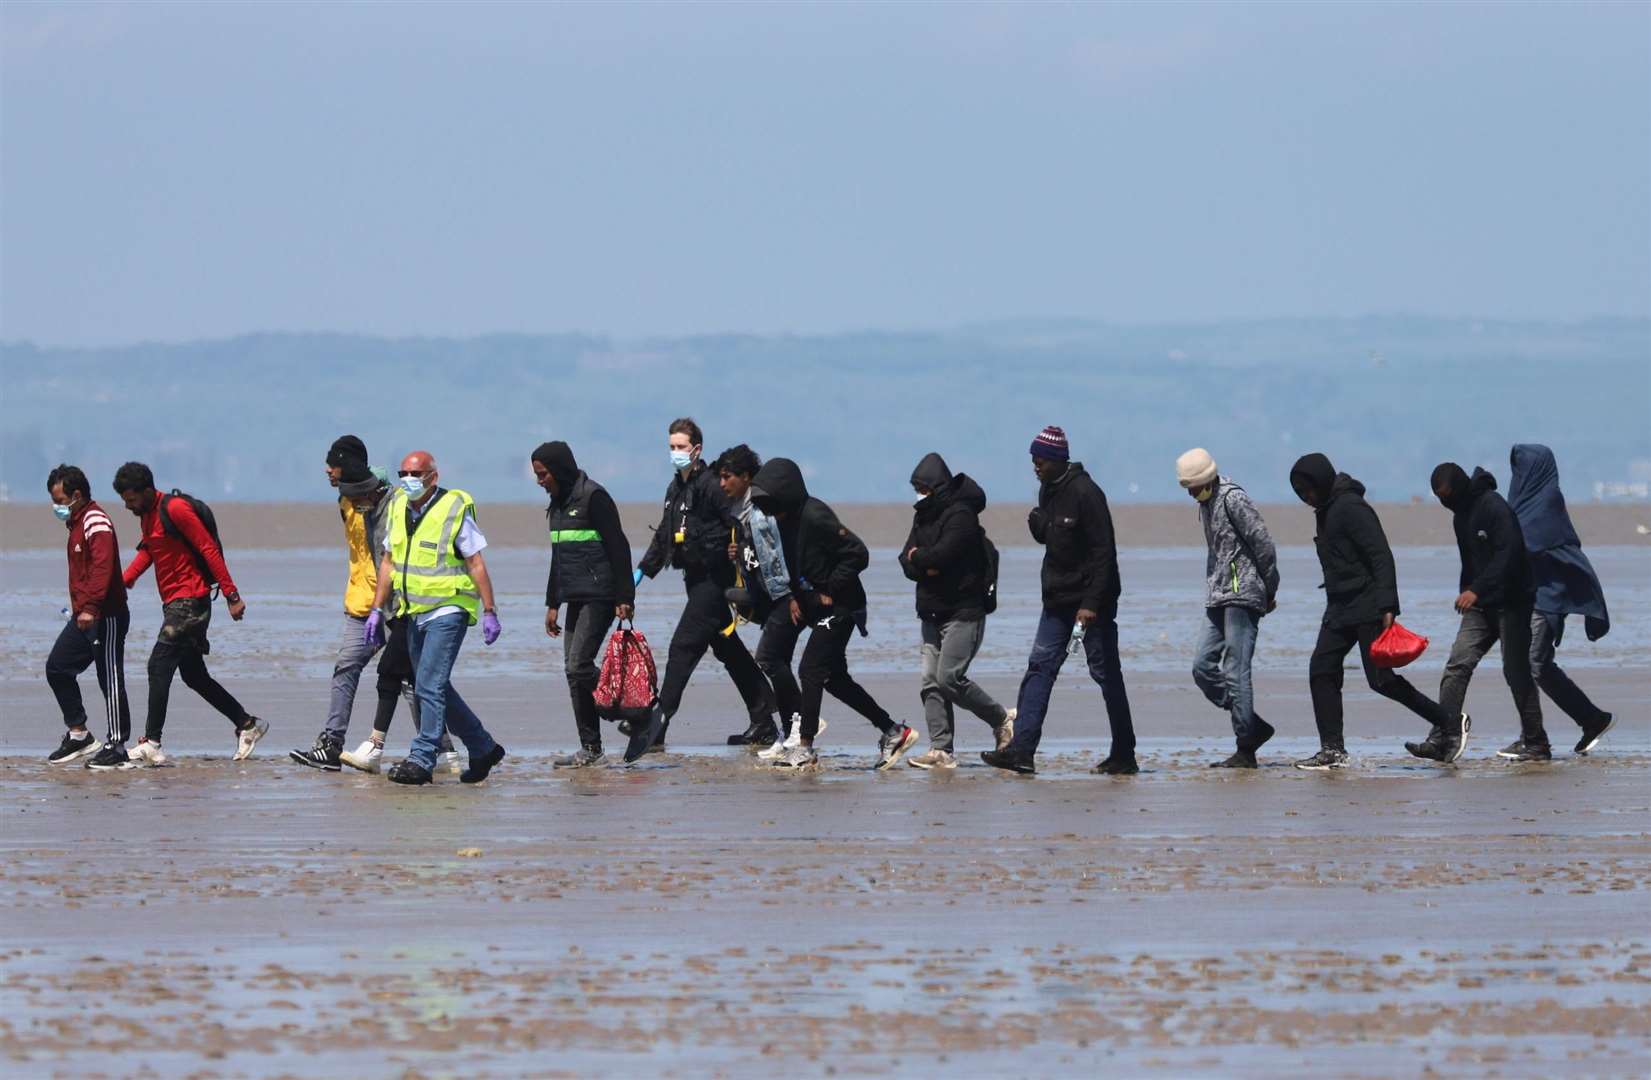 12 asylum seekers with two officials at Romney Marsh. Submitted picture